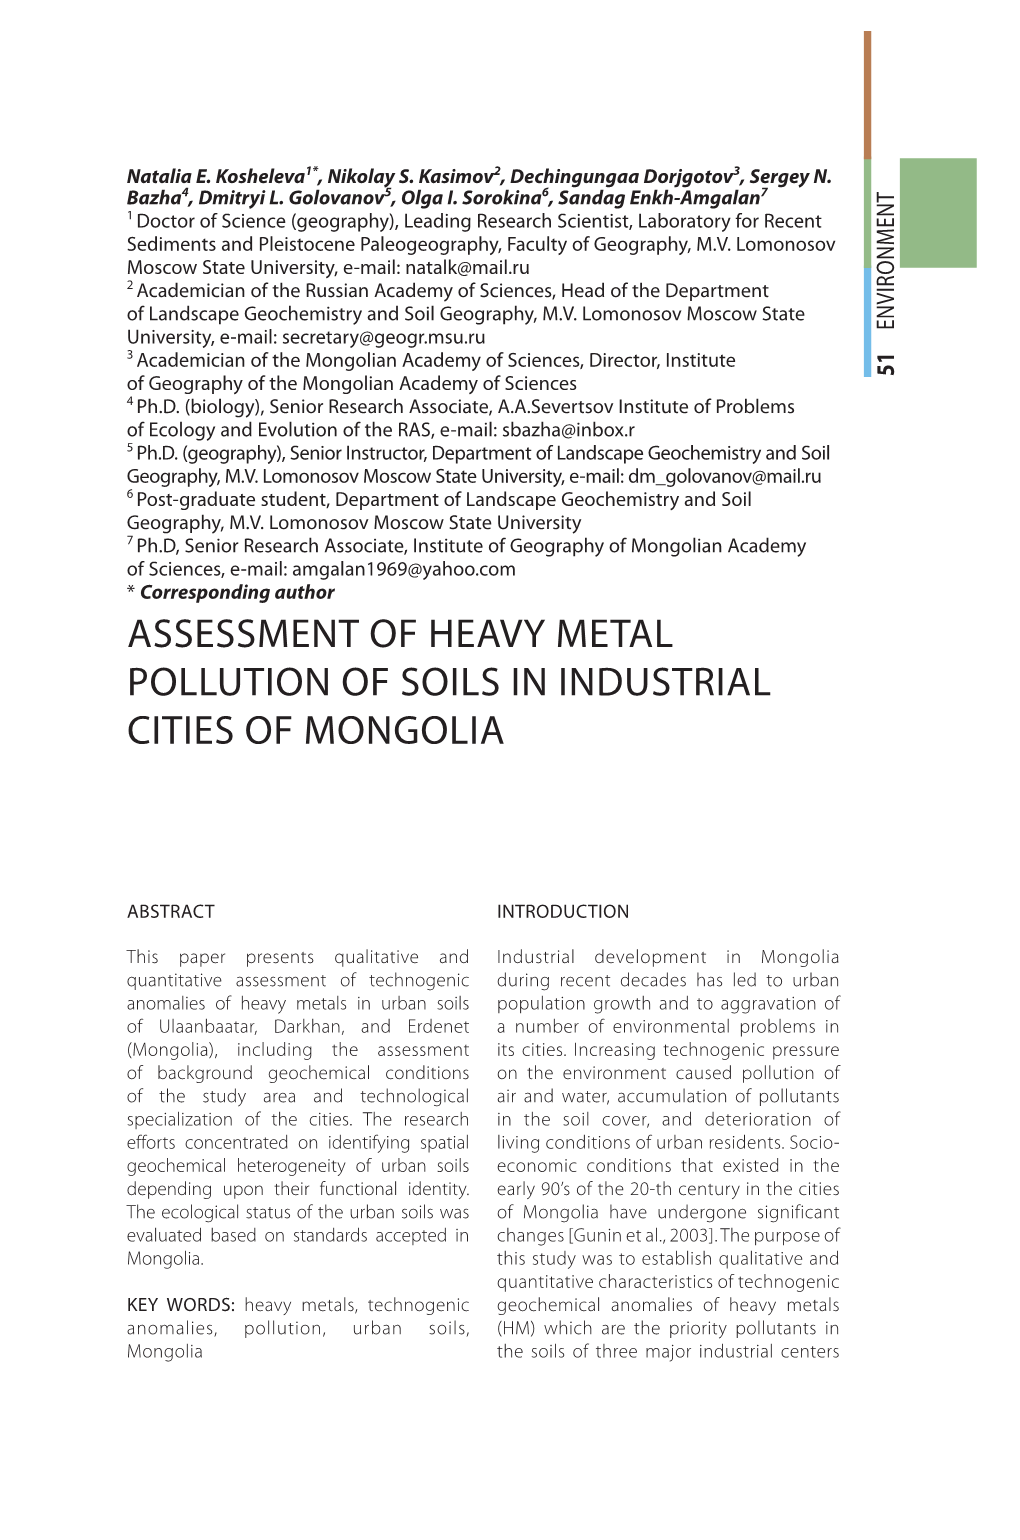 Assessment of Heavy Metal Pollution of Soils In